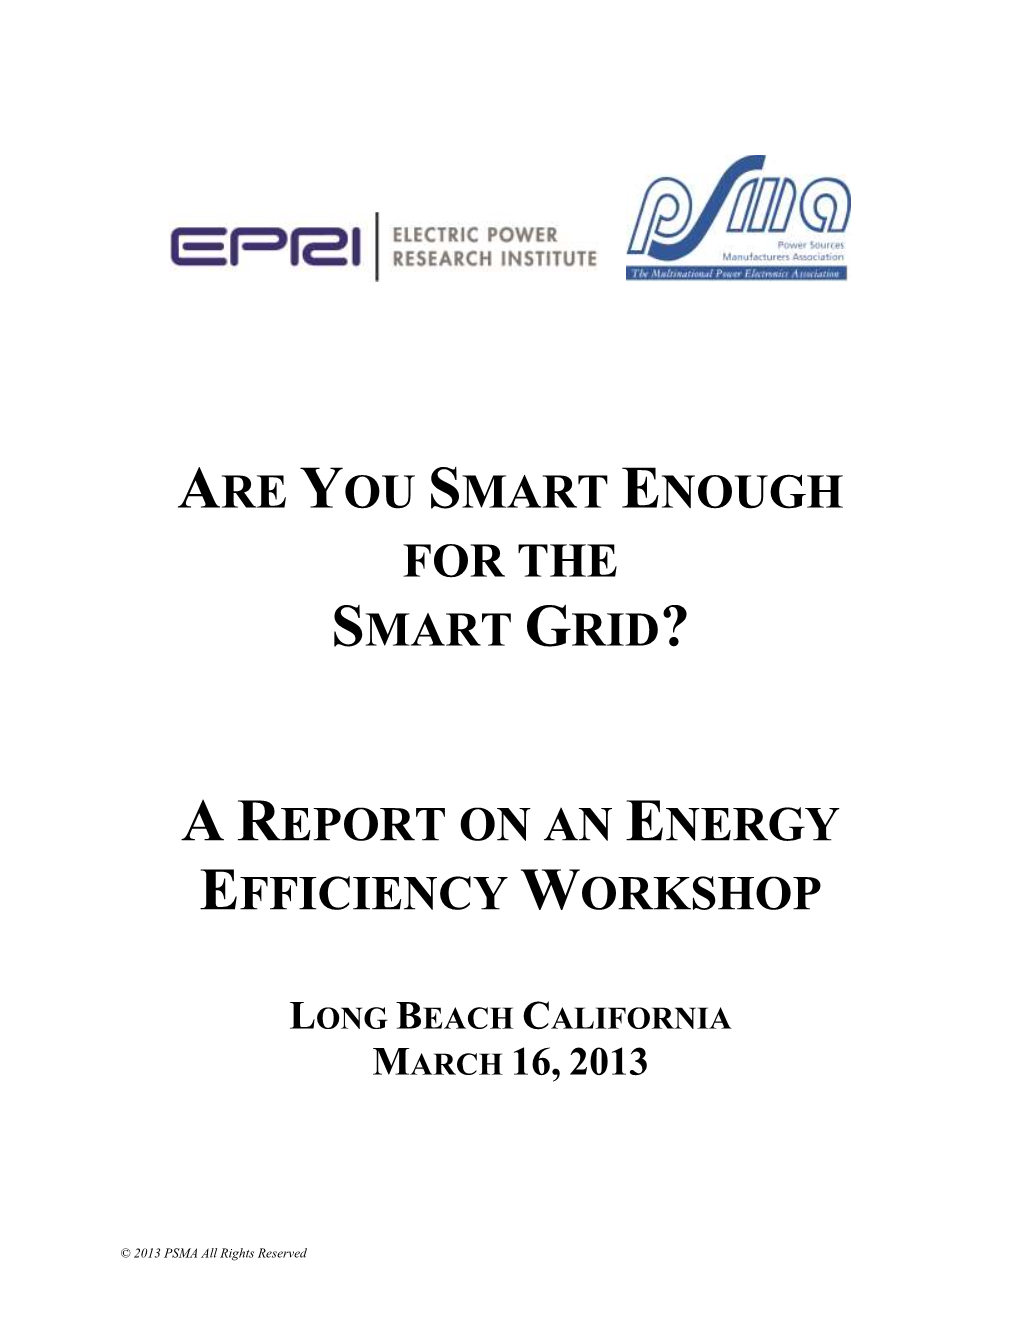 Are You Smart Enough for the Smart Grid?